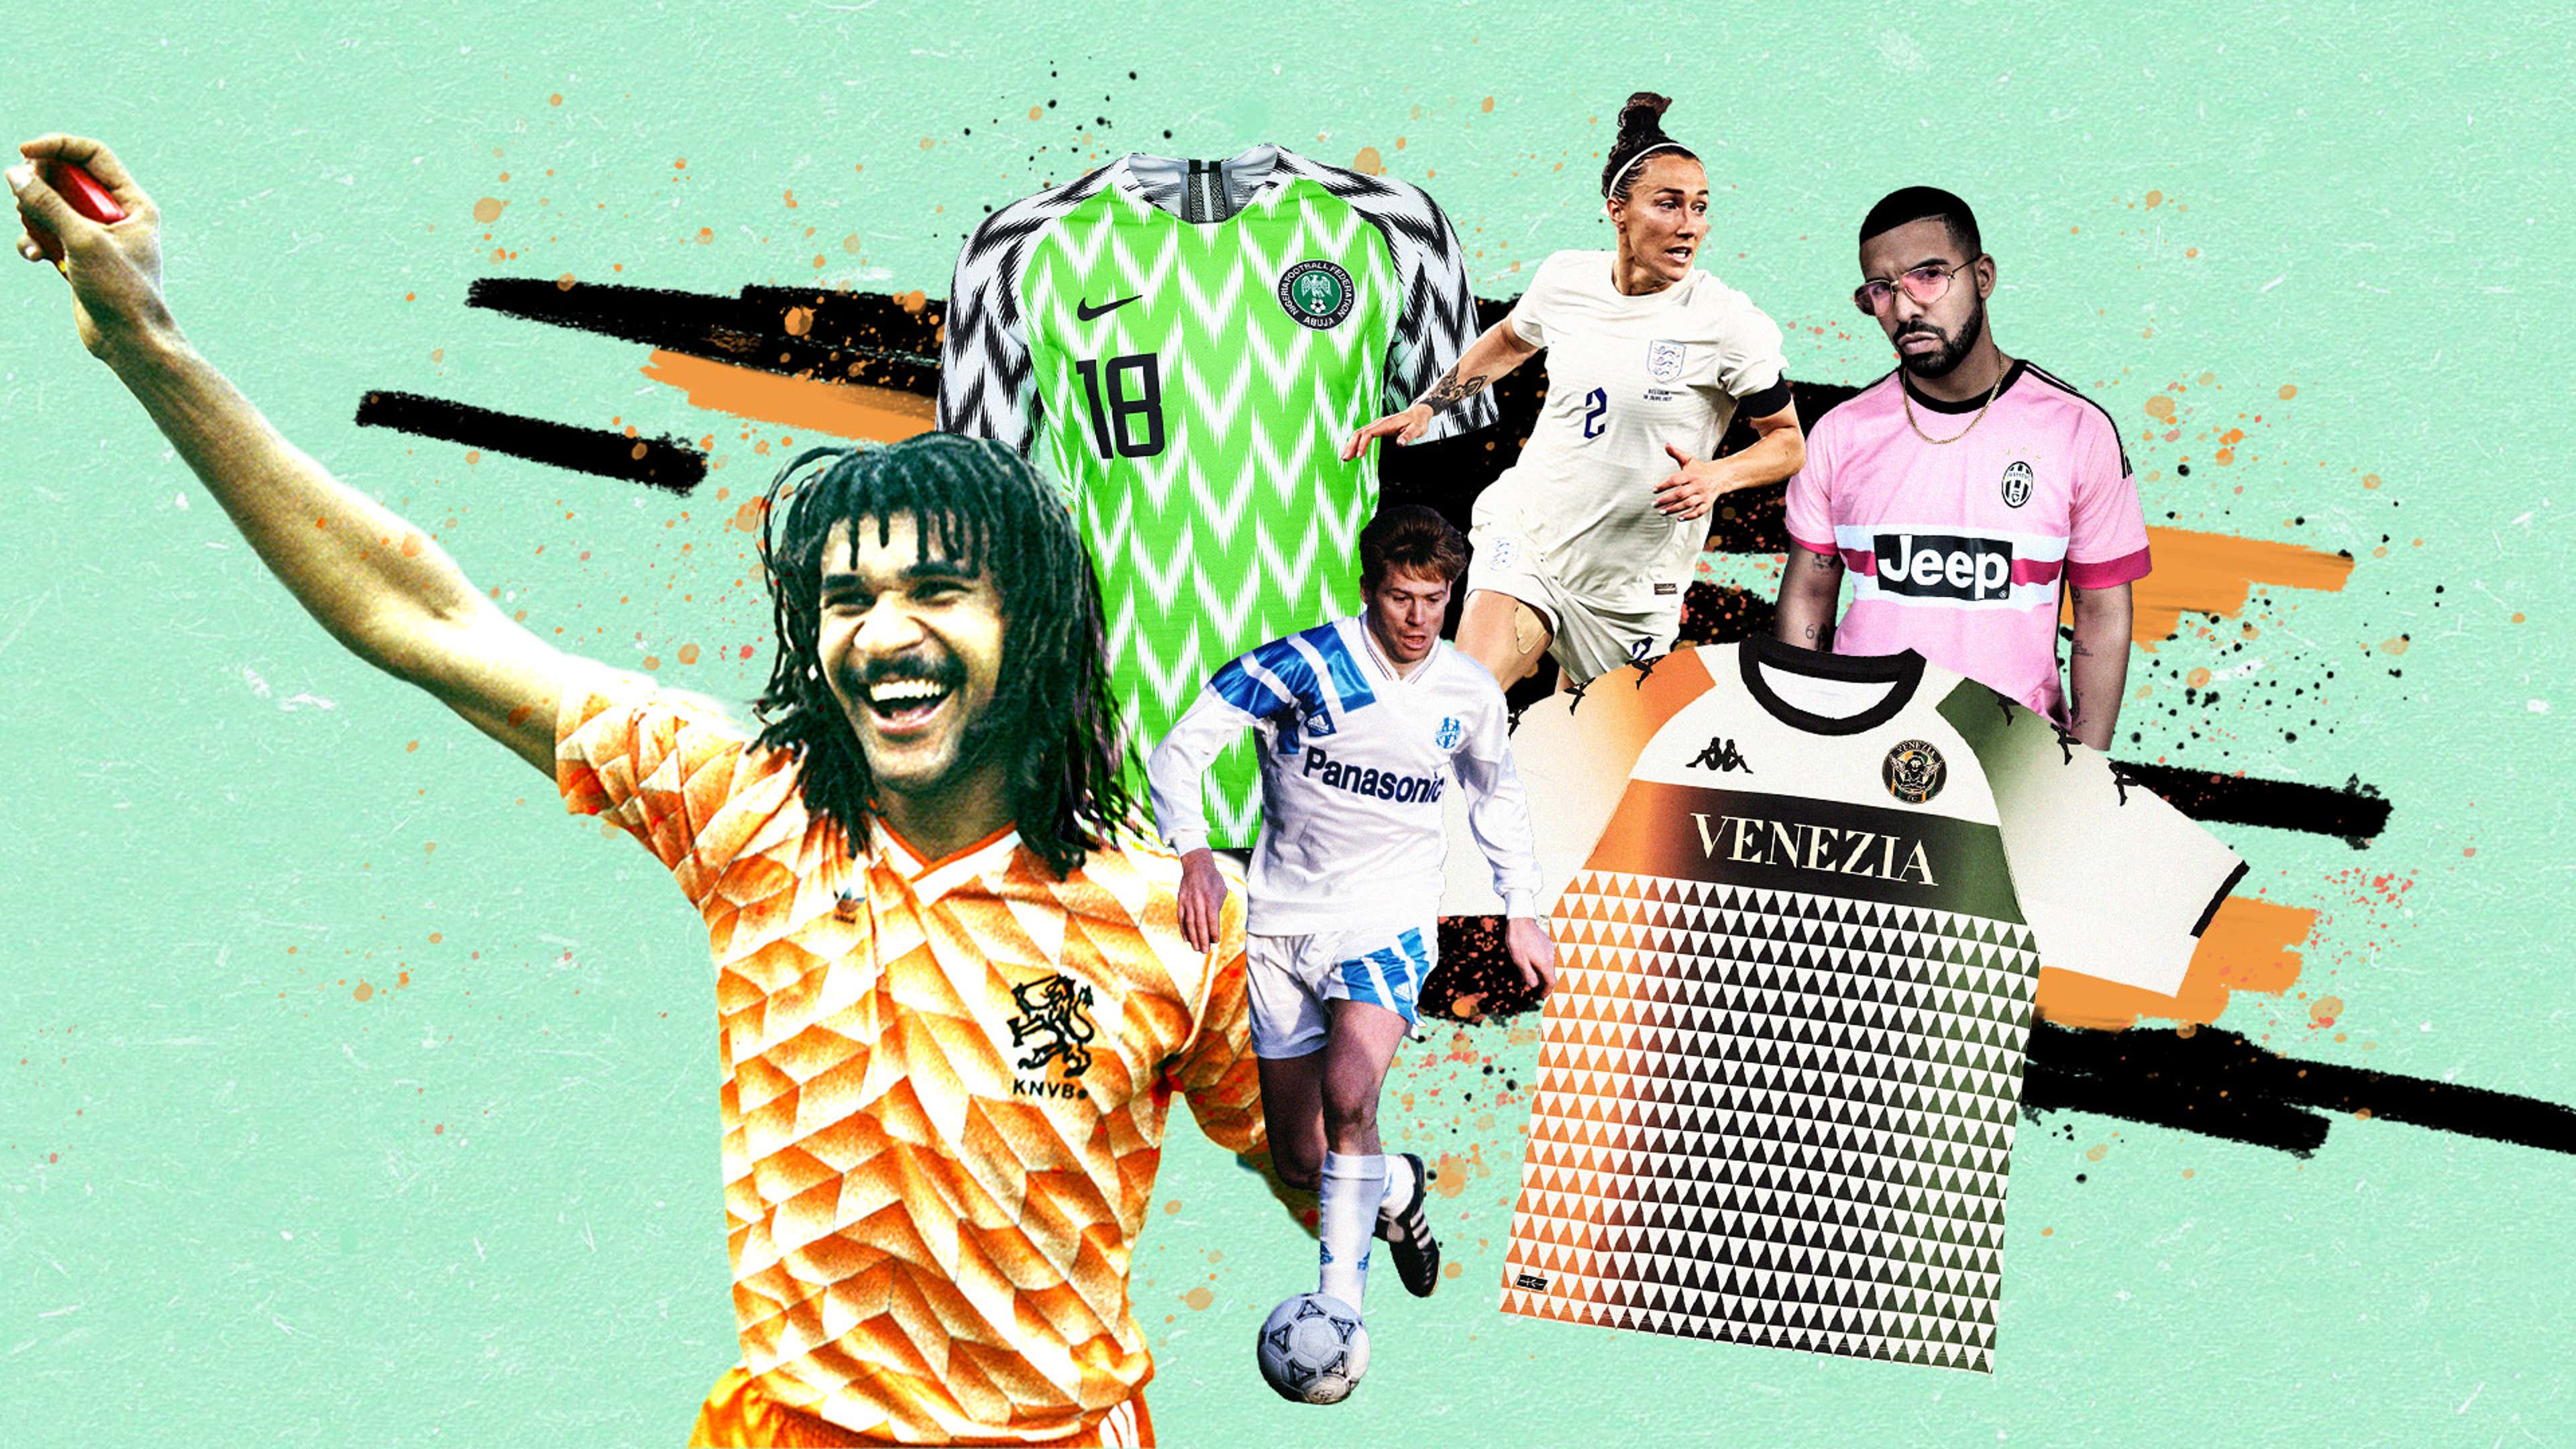 Retro Soccer/Football Jerseys From The Most Iconic Years –